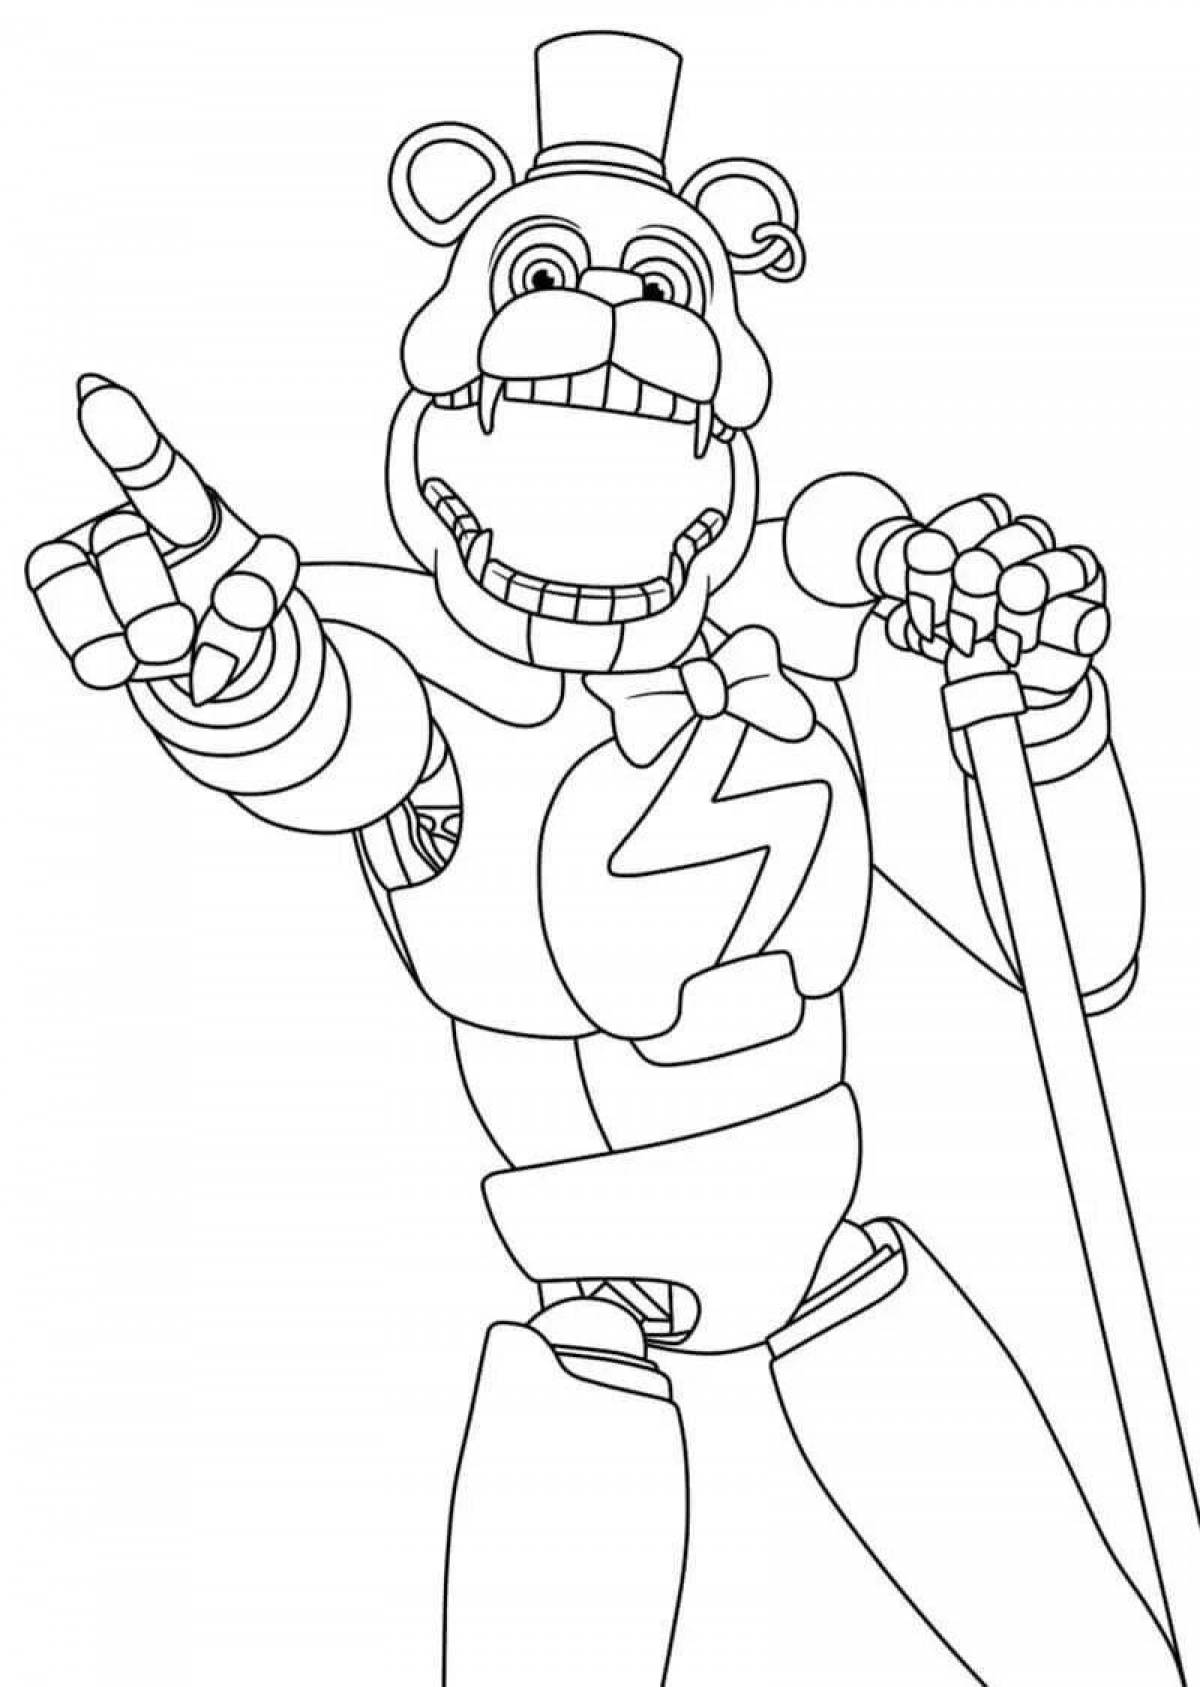 Coloring book shiny glam rock bonnie